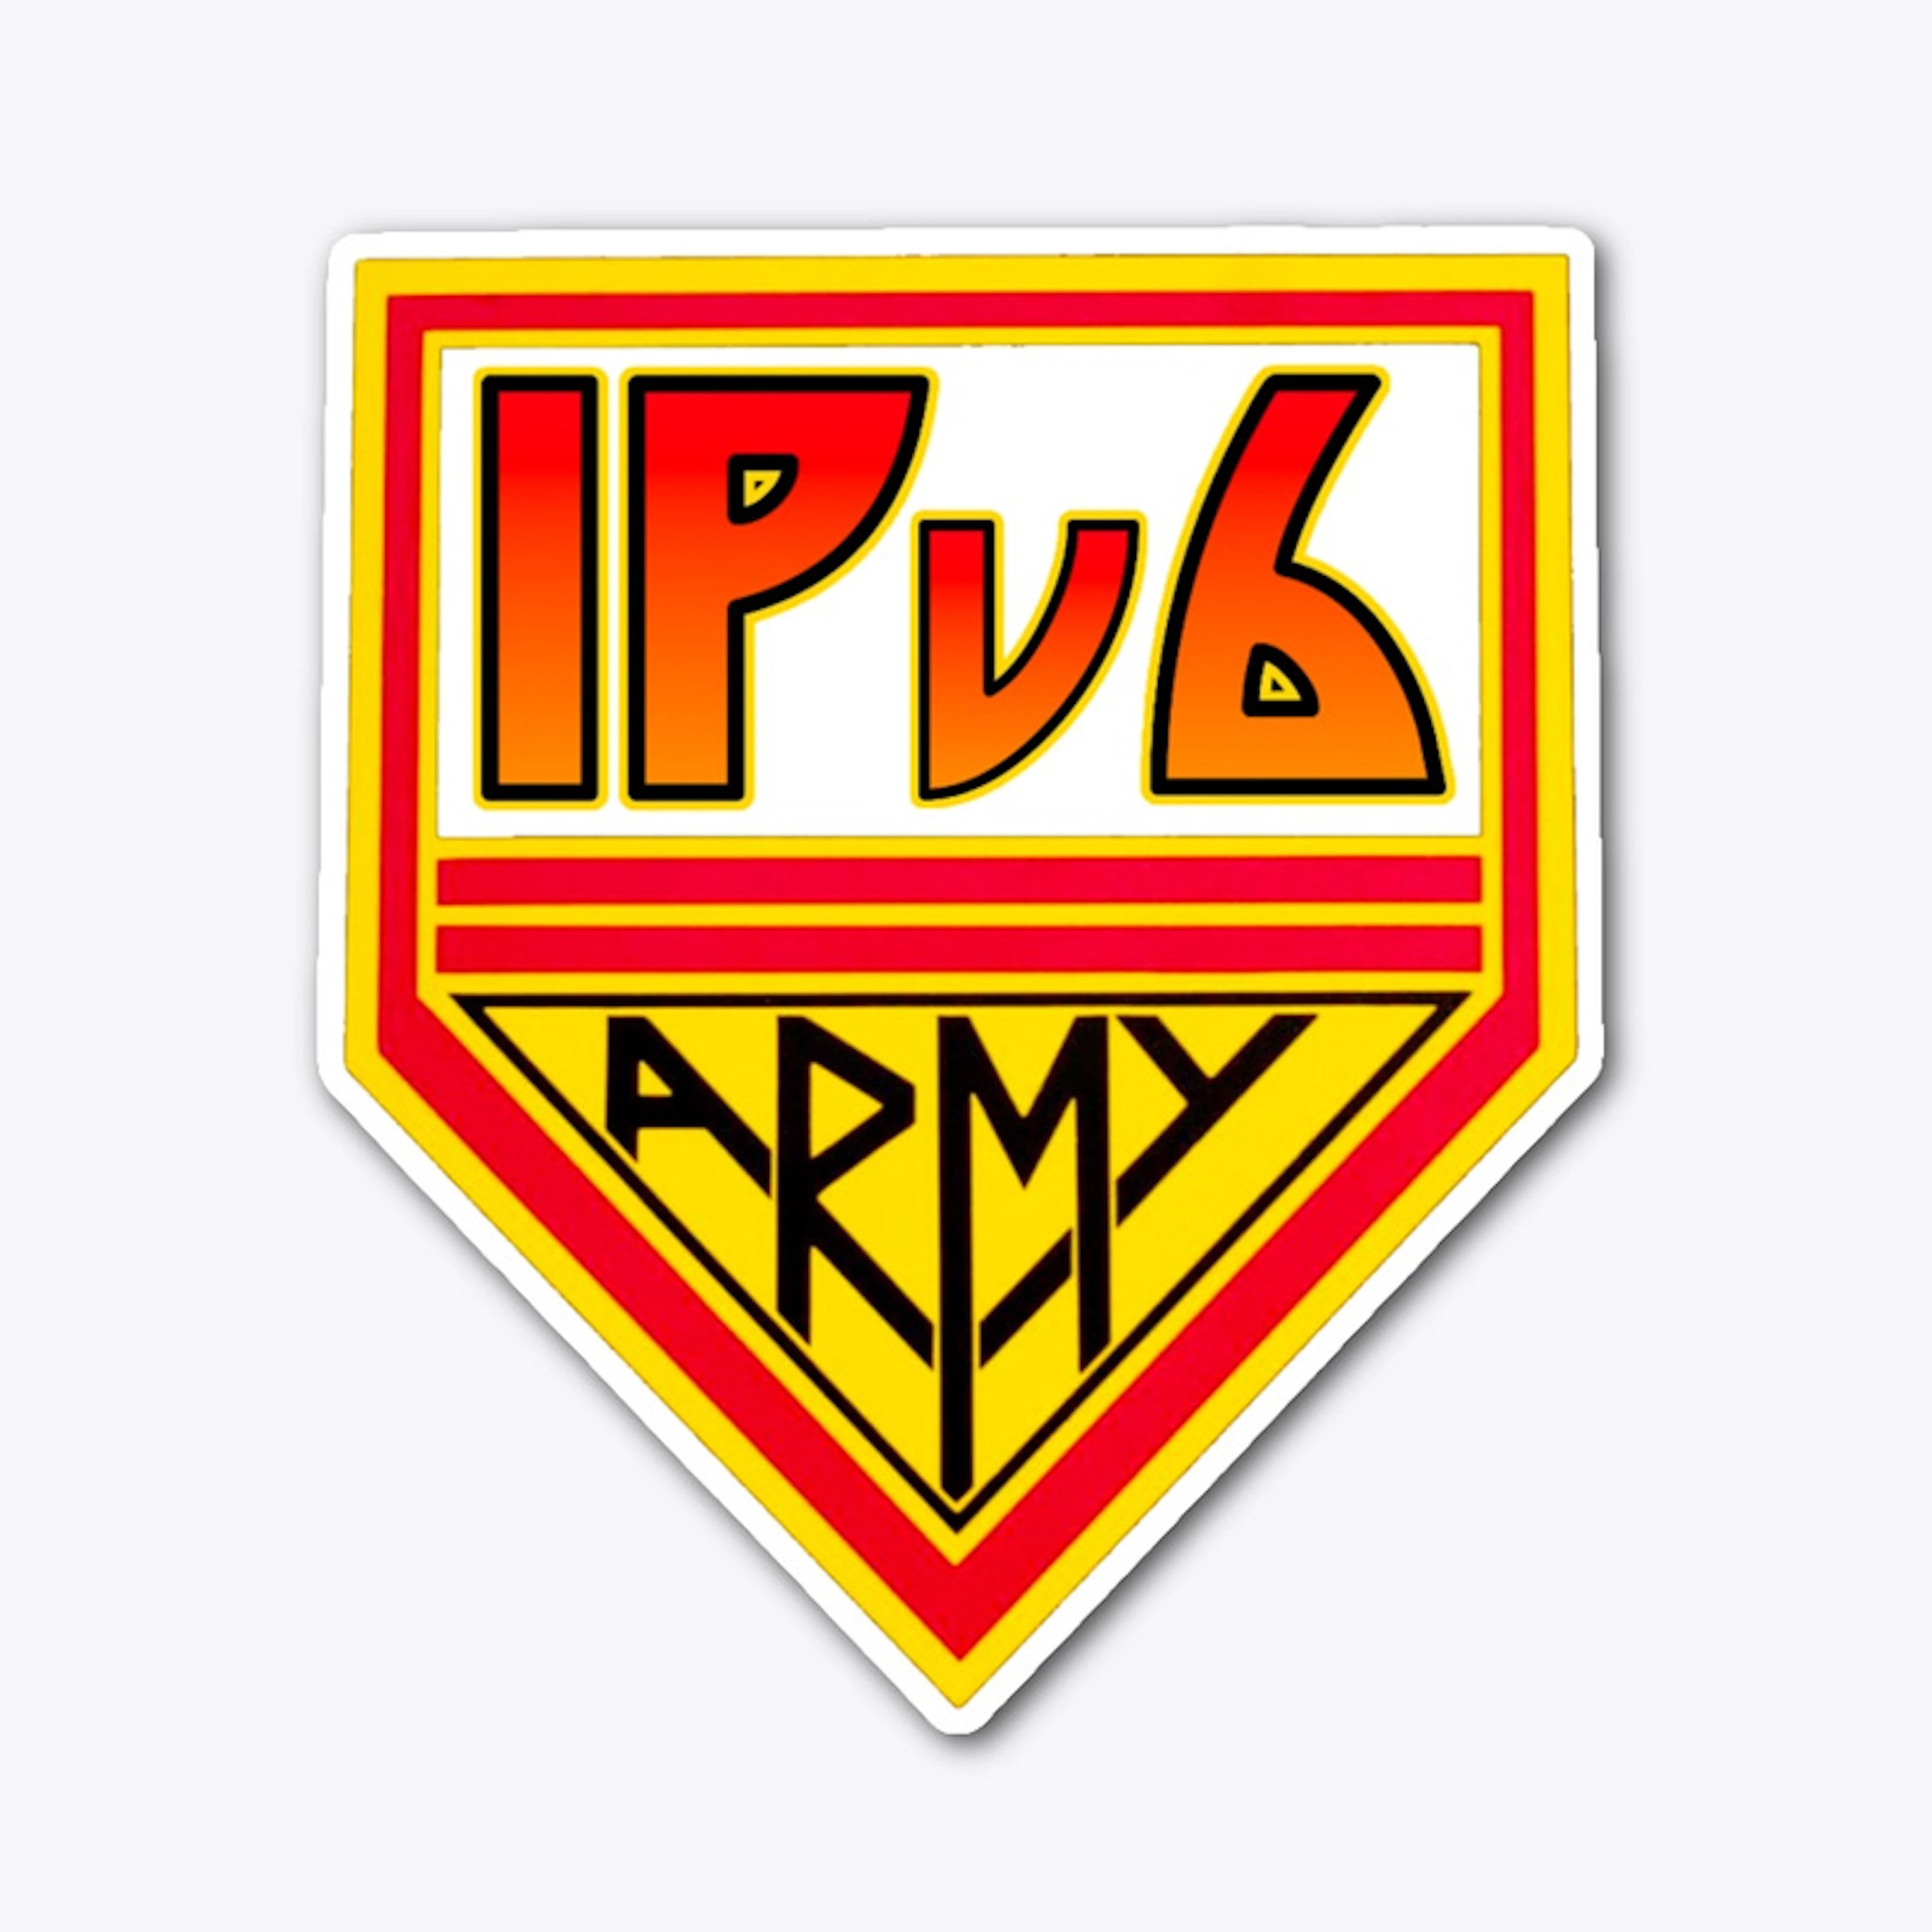 Join the army. The IPv6 army.